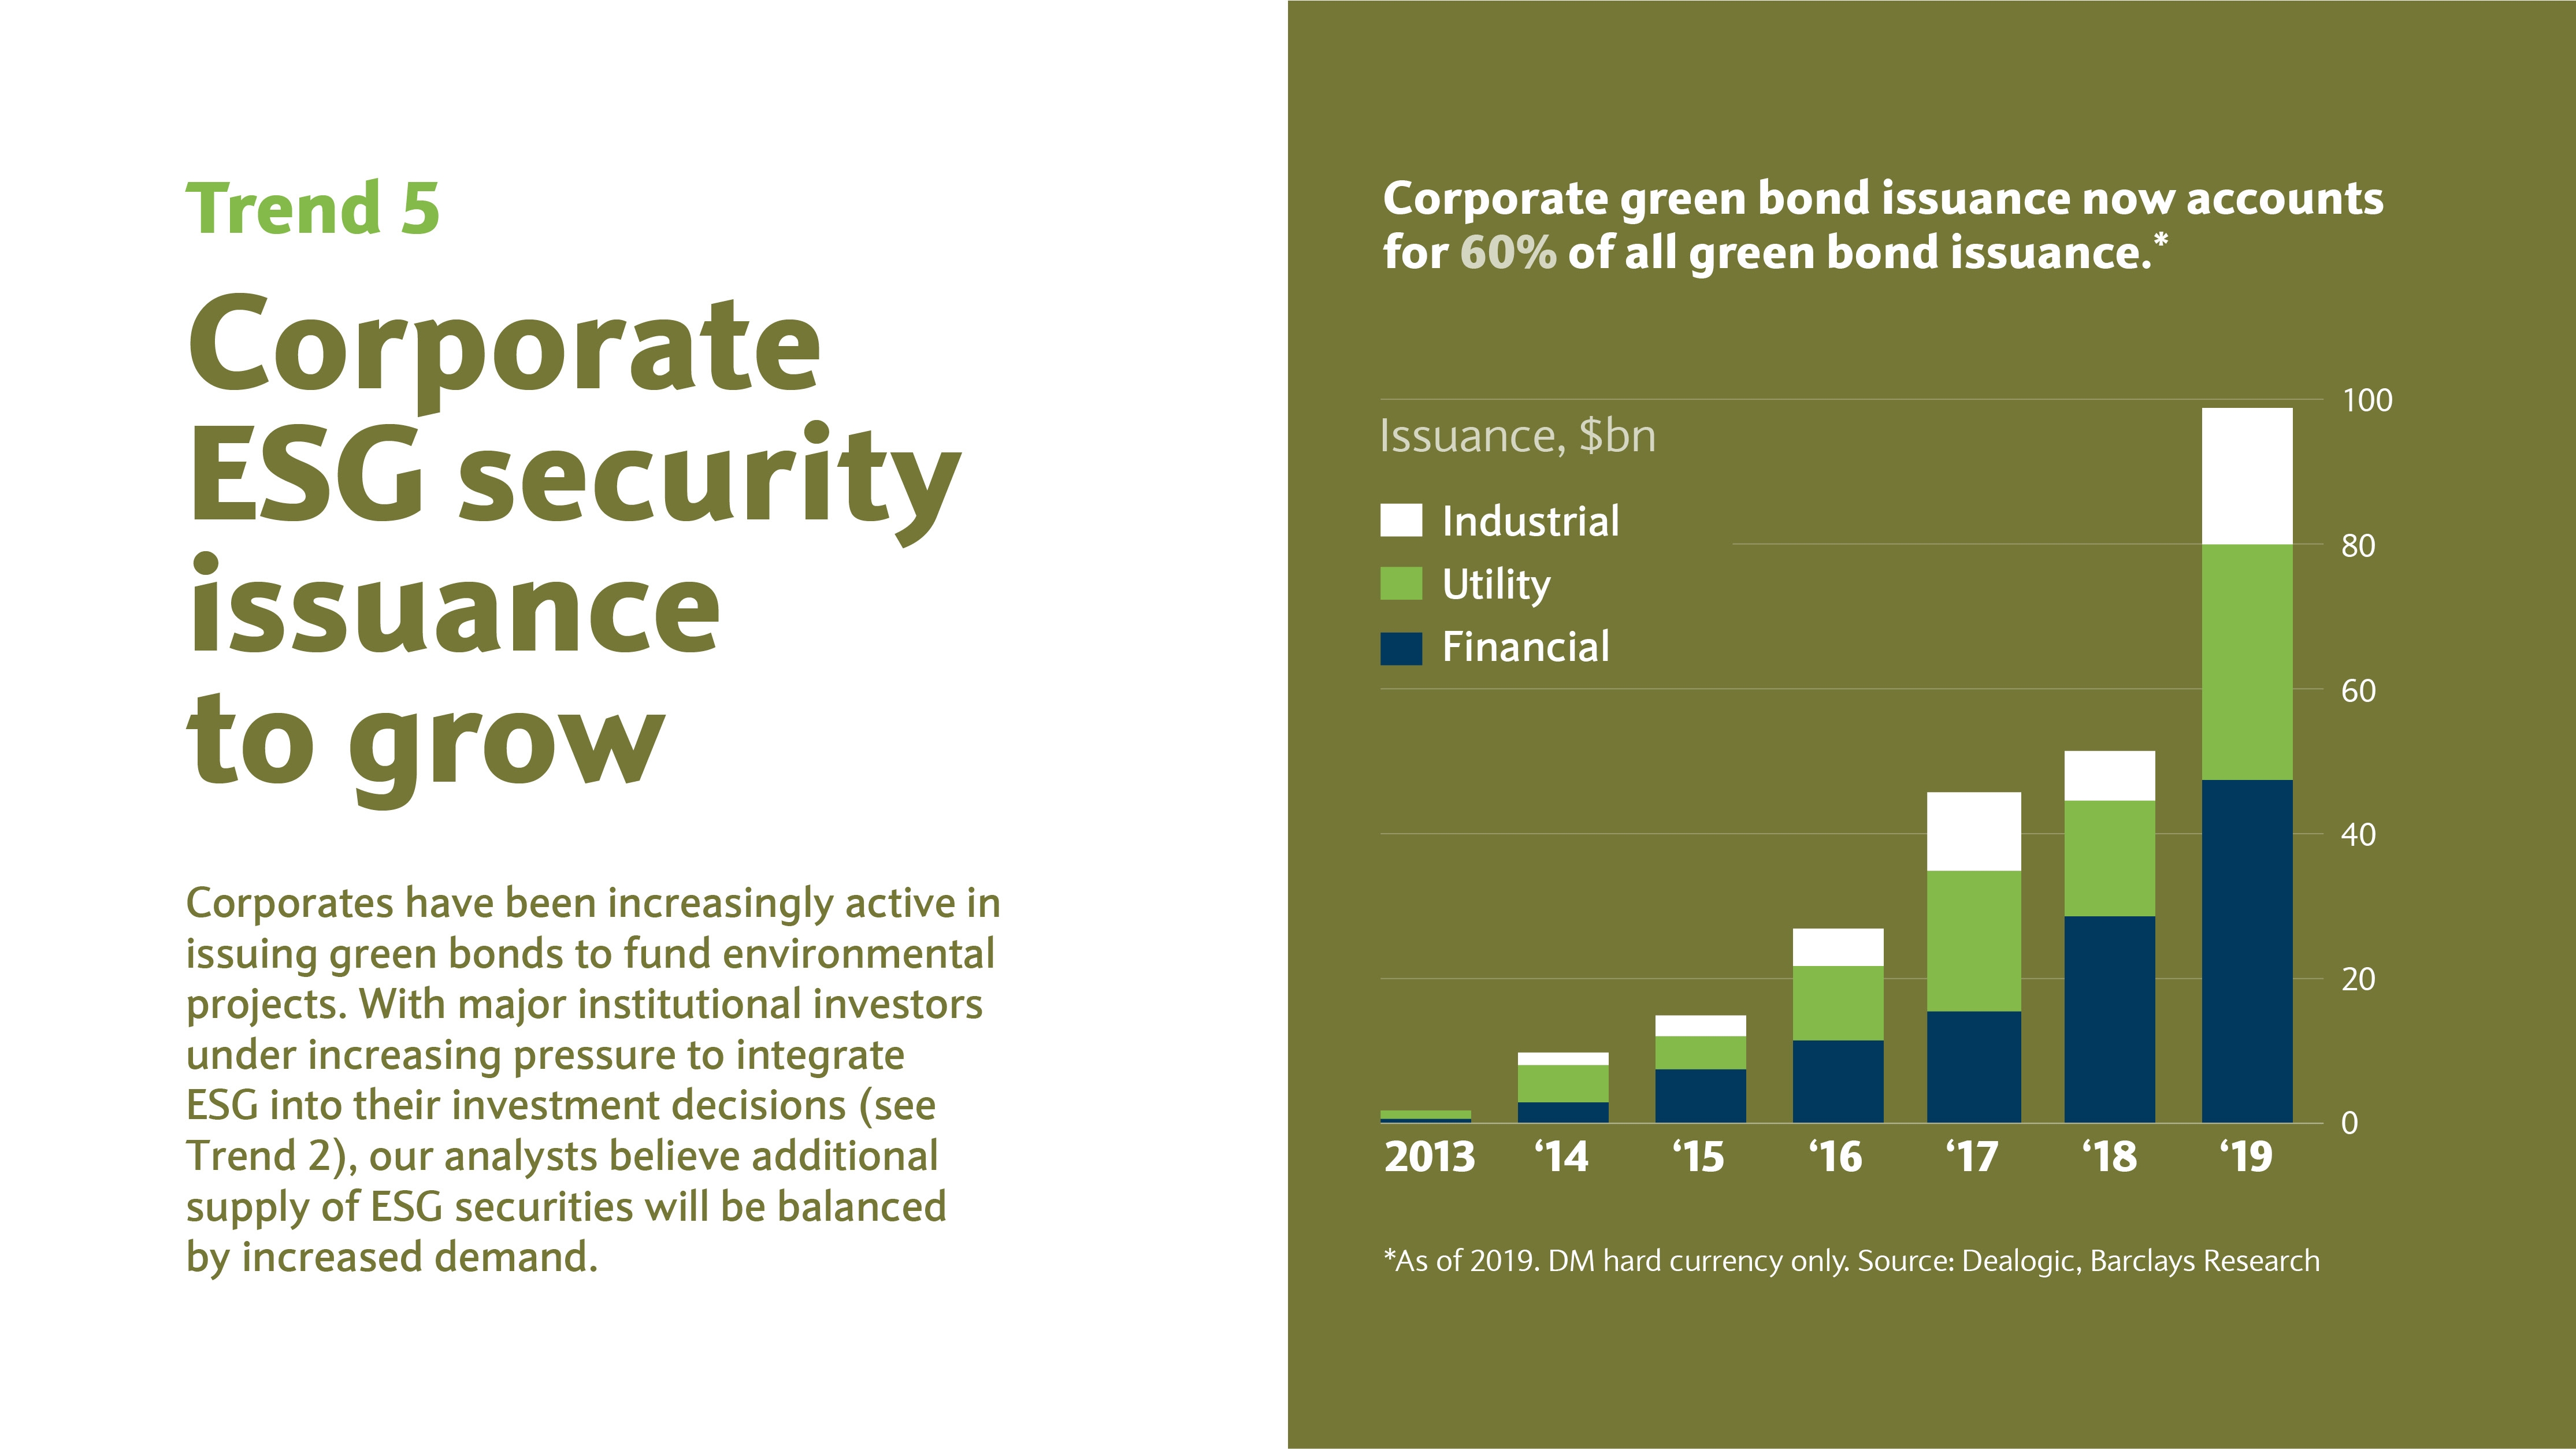 Corporate ESG security issuance to grow